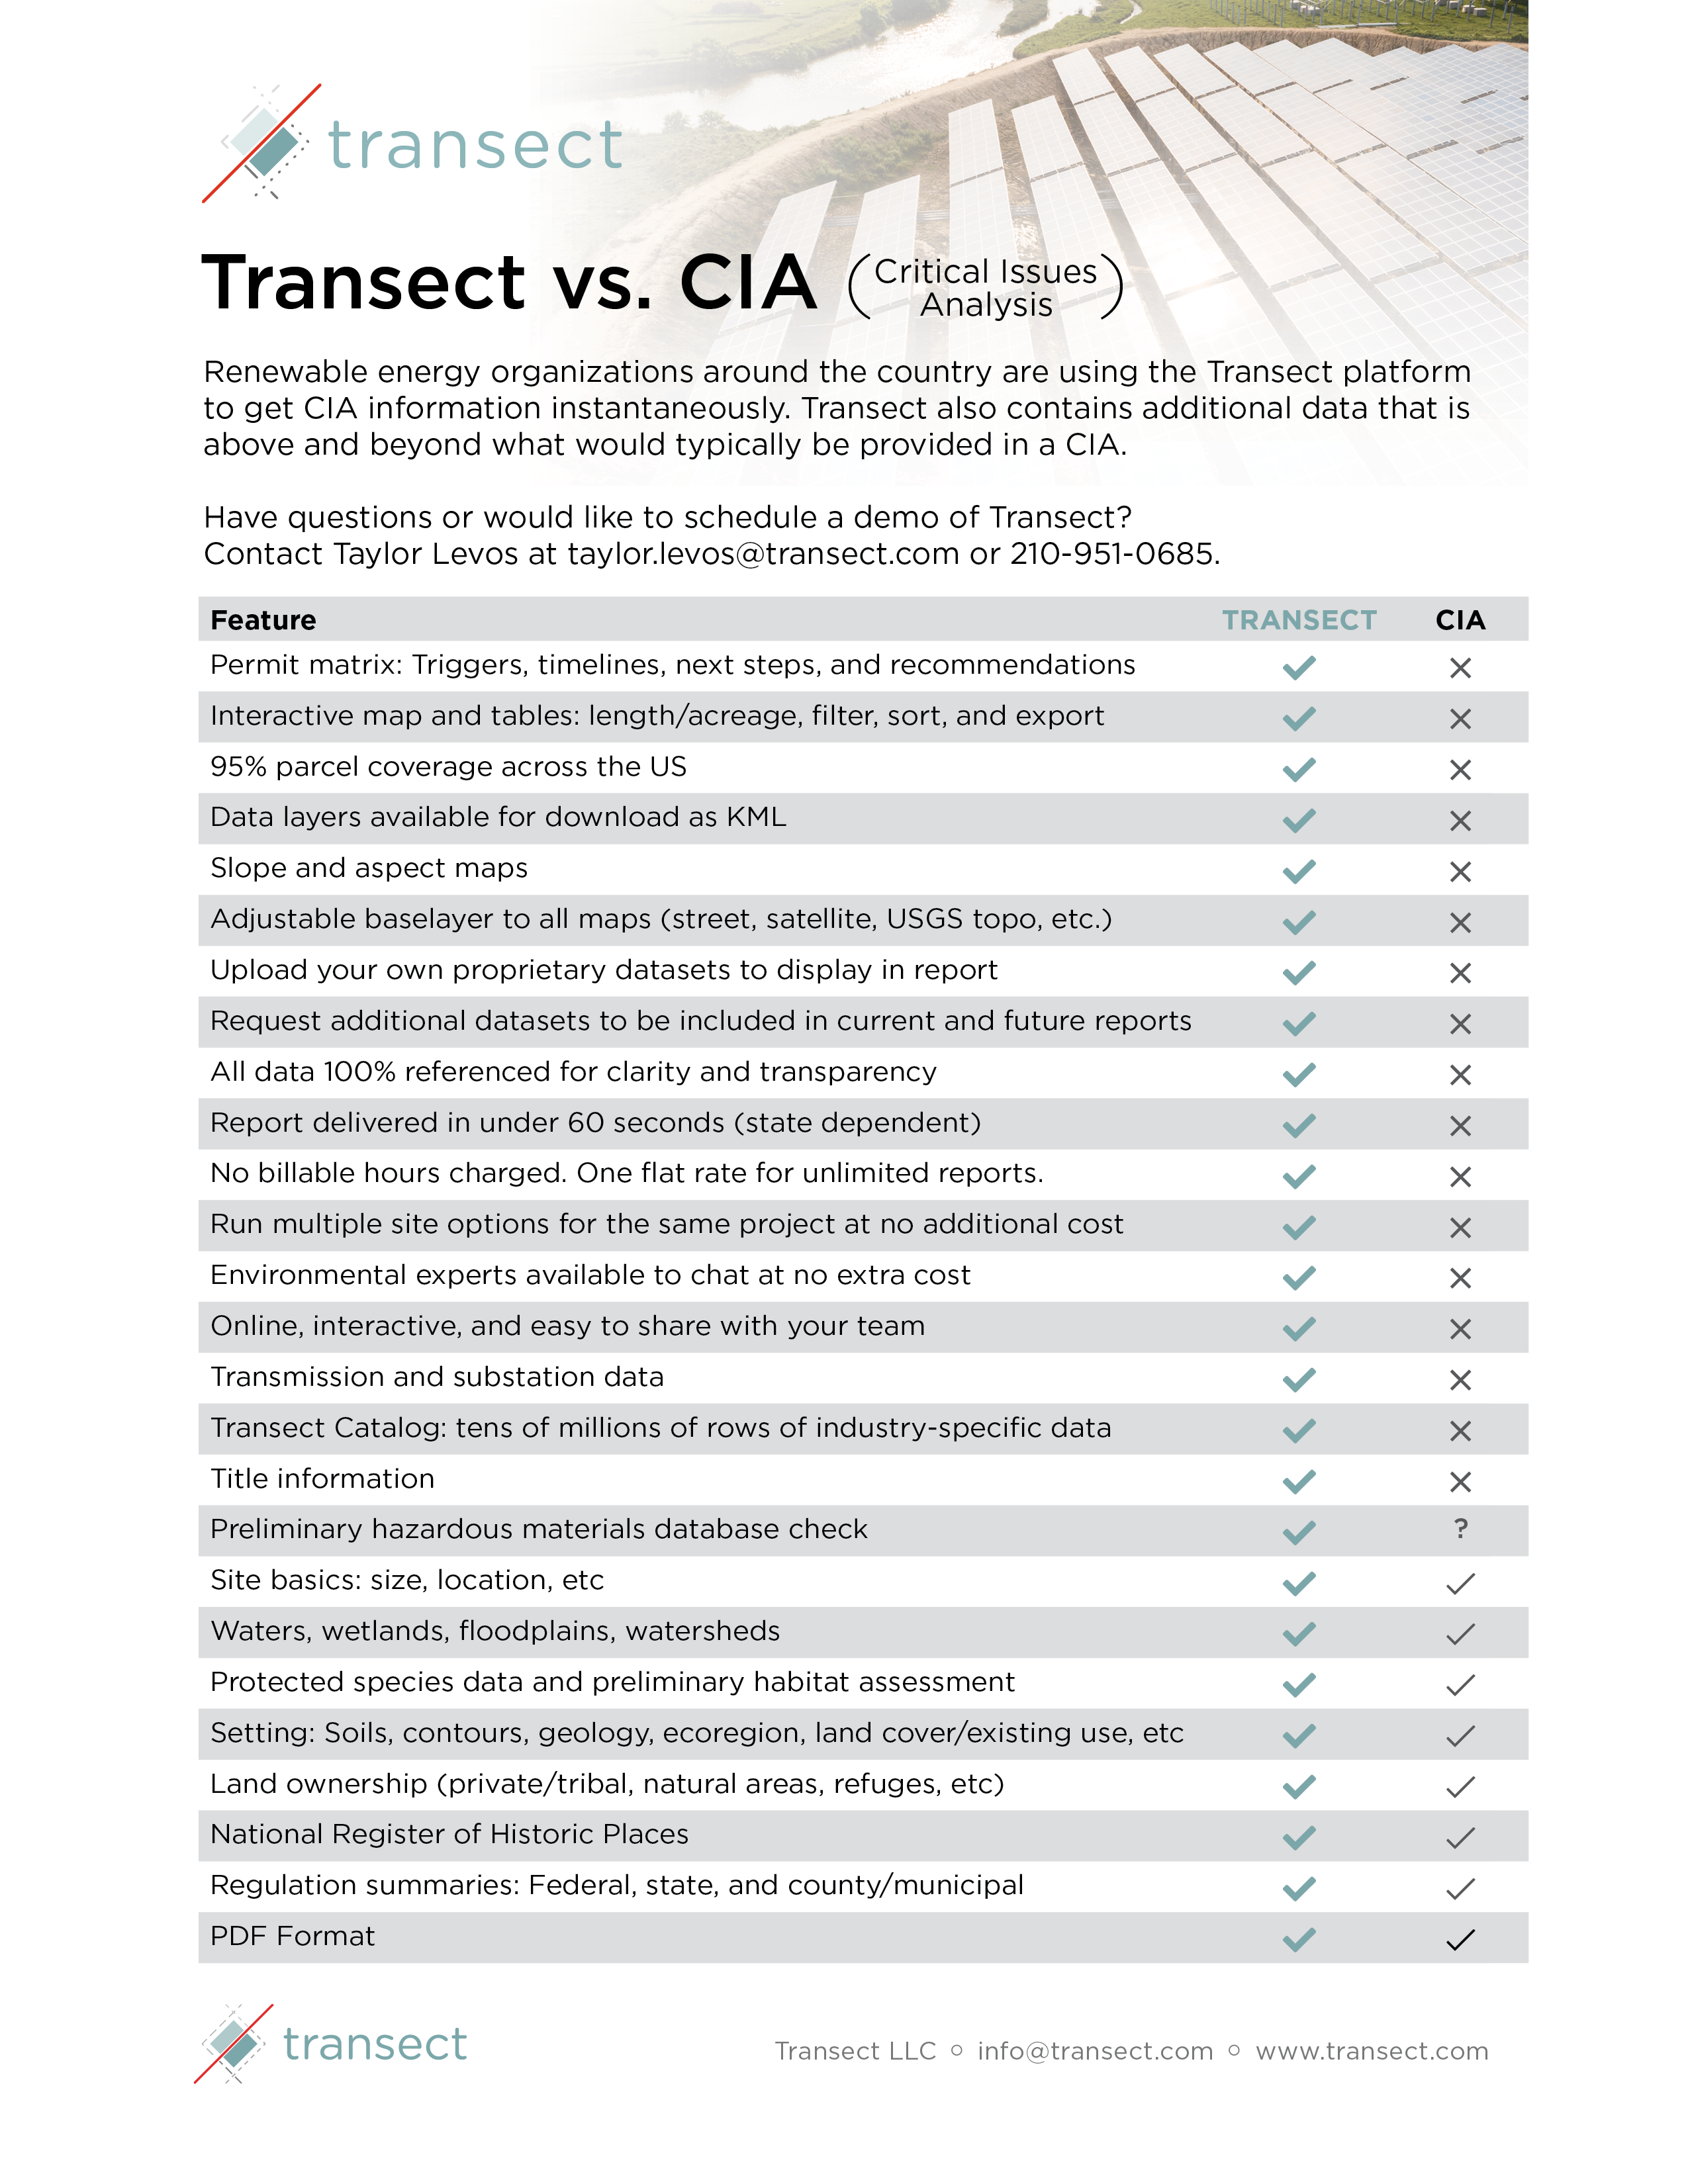 Transect vs. Critical Issues Analysis (CIA) 1-pager